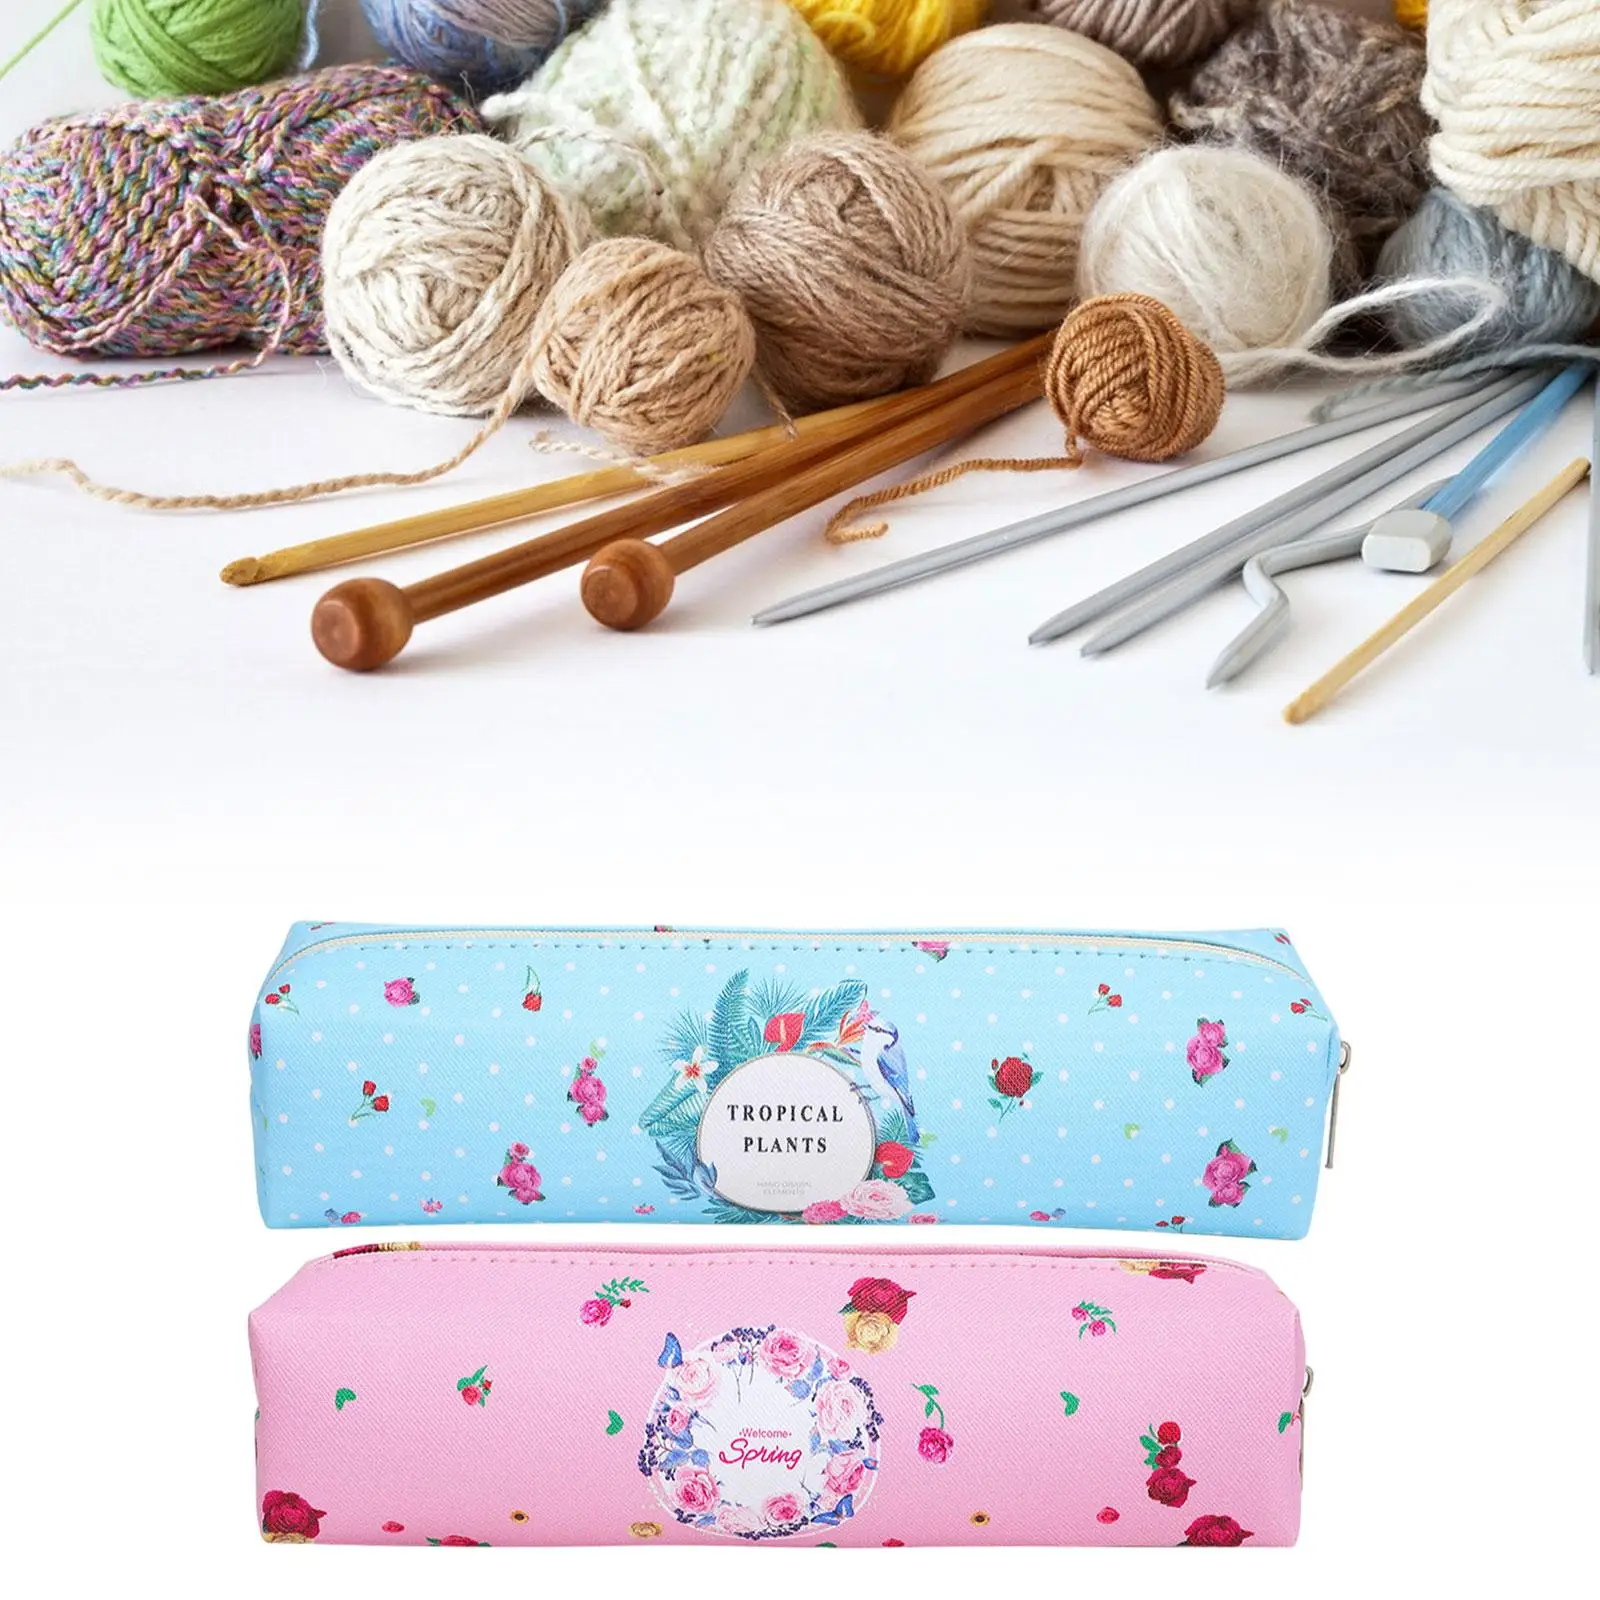 Crochet Hook Case Zippers Bag Empty Zippered Crocheting Multifunction Practical Pouch Traveling Portable Storage Knitting Tote